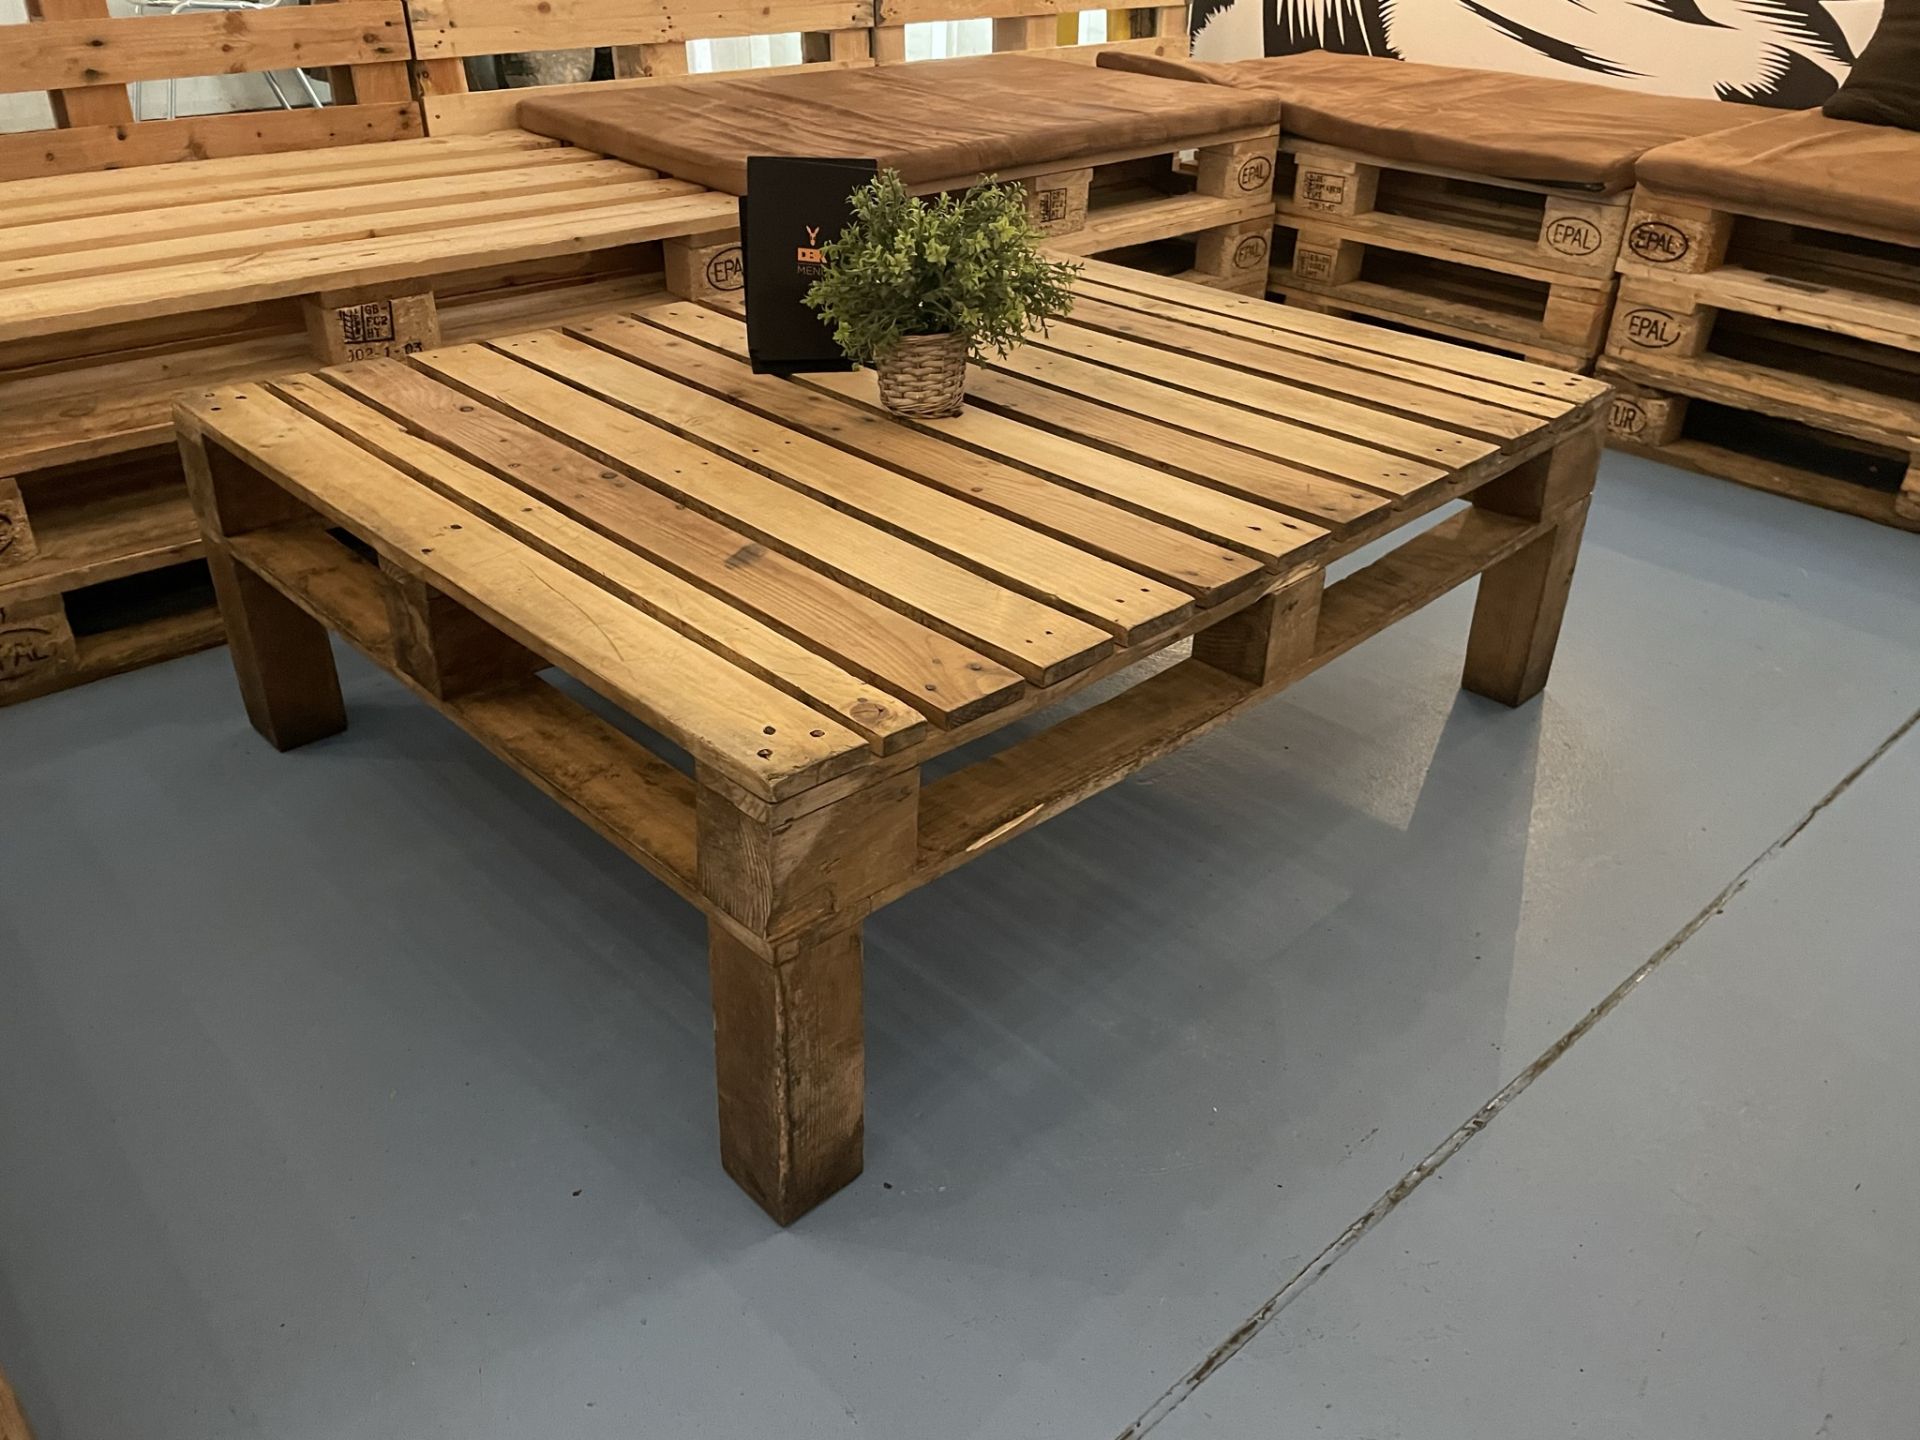 Quantity of Pallet Furniture - As Pictured |Includes: Corner Couch, Coffee Table & Dining Table - Image 3 of 5